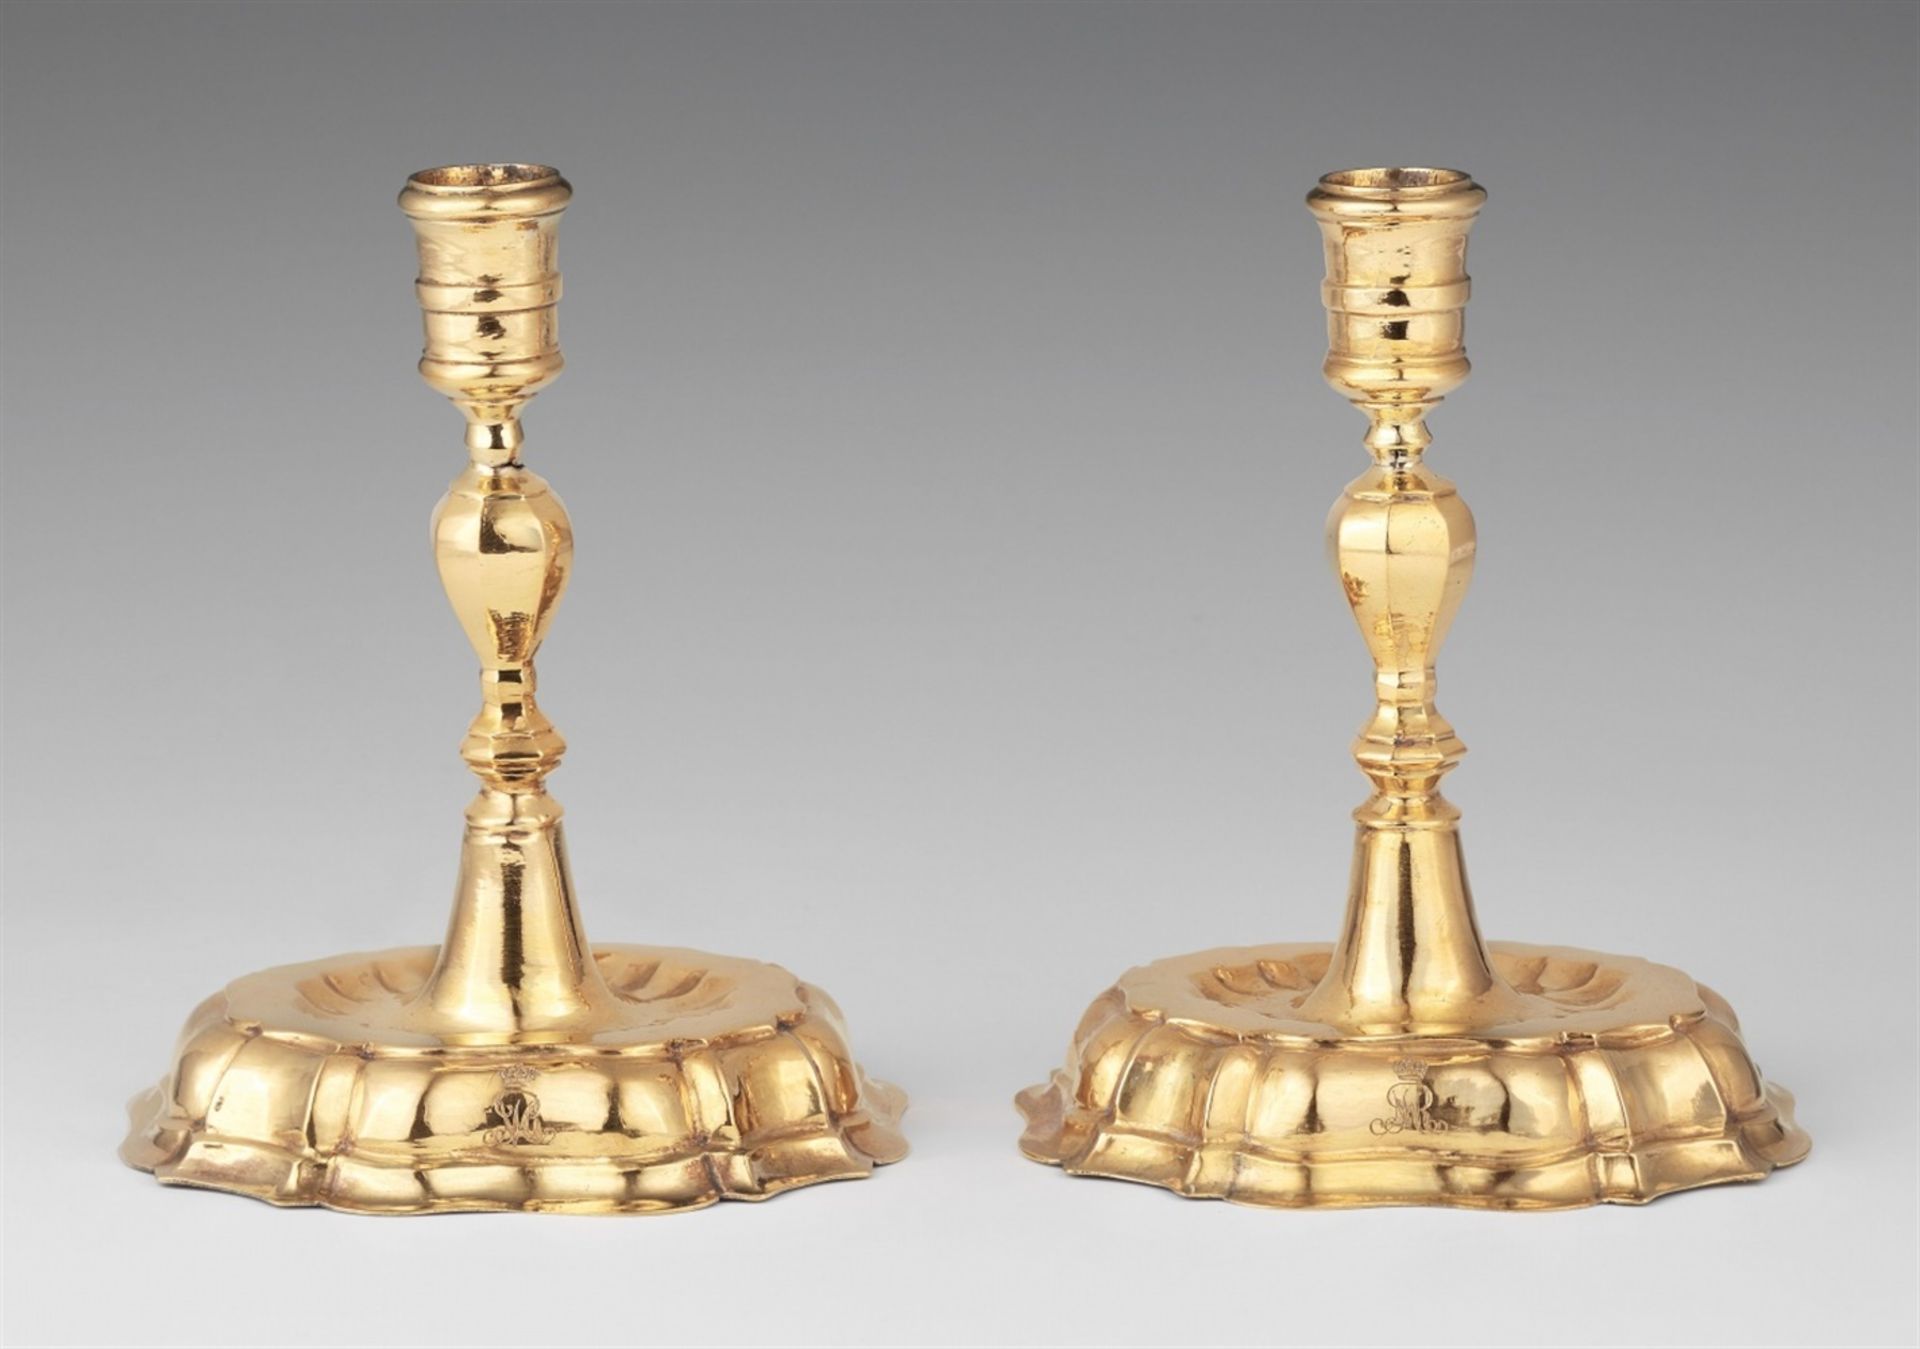 A pair of Breslau silver candlesticksSilver-gilt candlesticks with baluster-form shafts issuing from